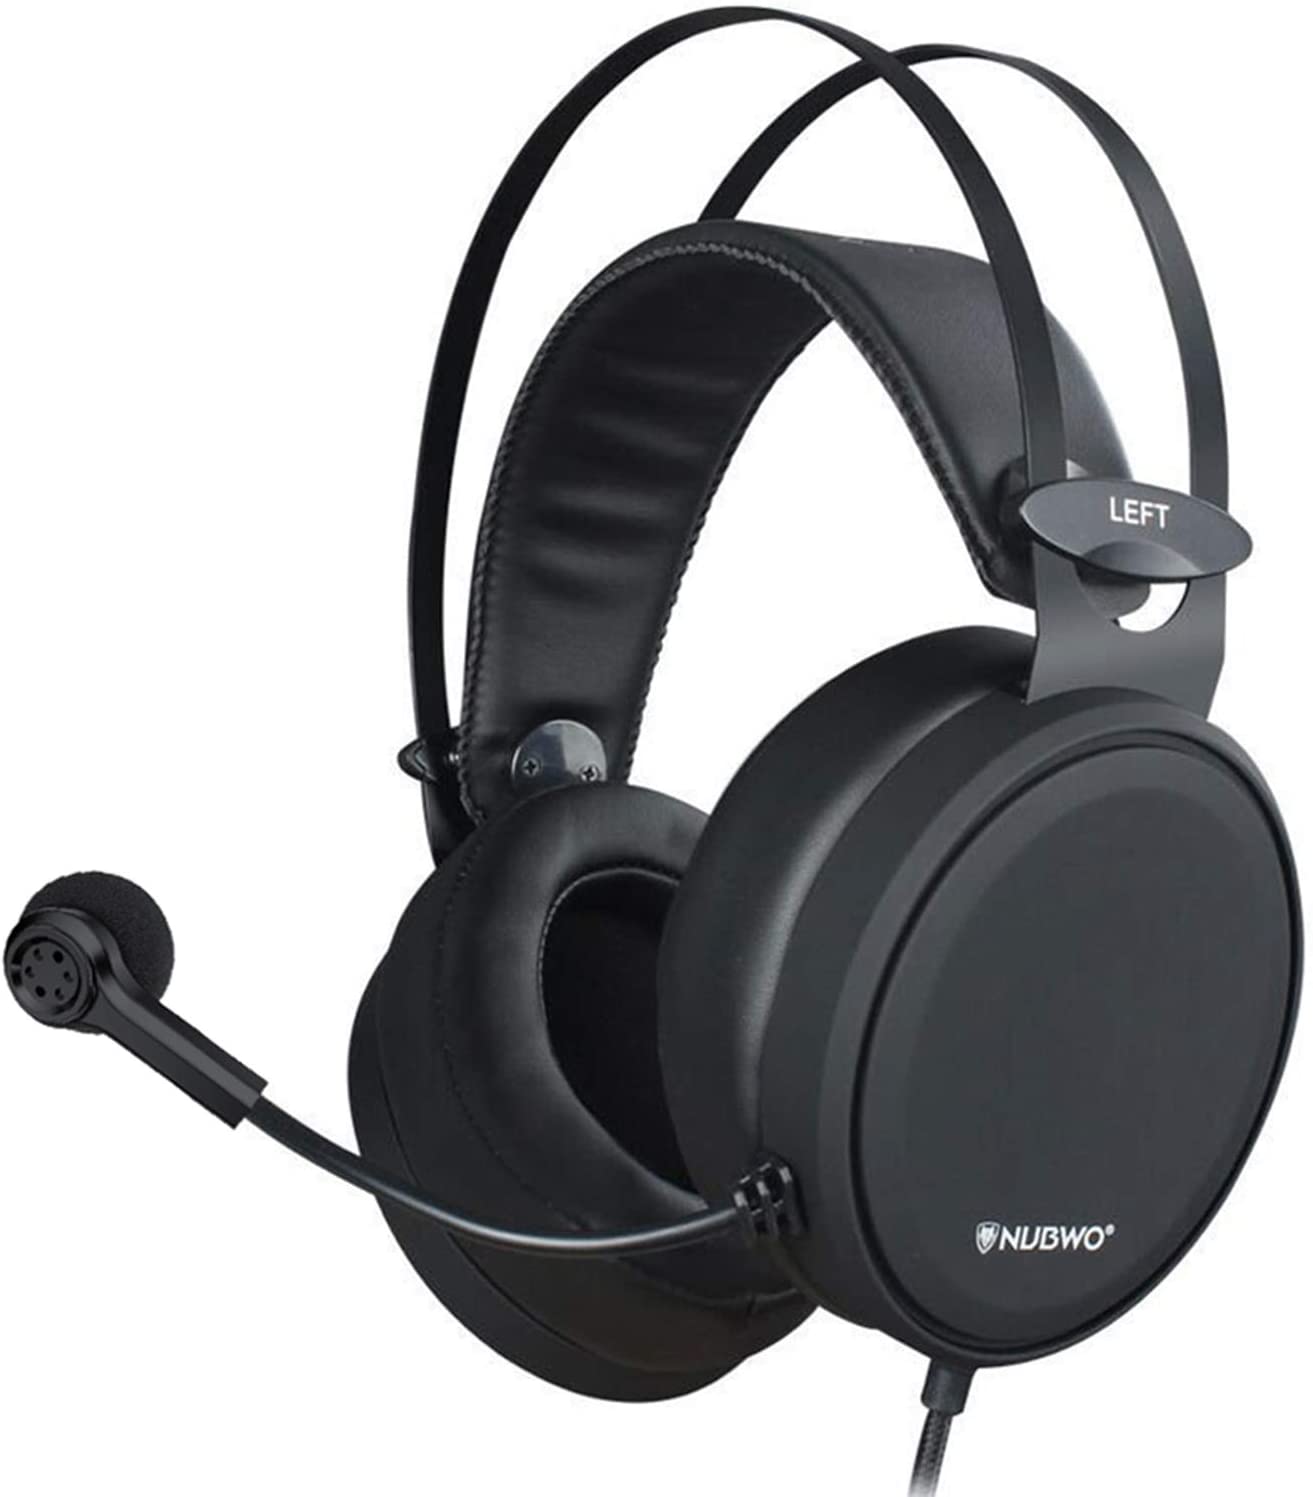 NUBWO Gaming headsets